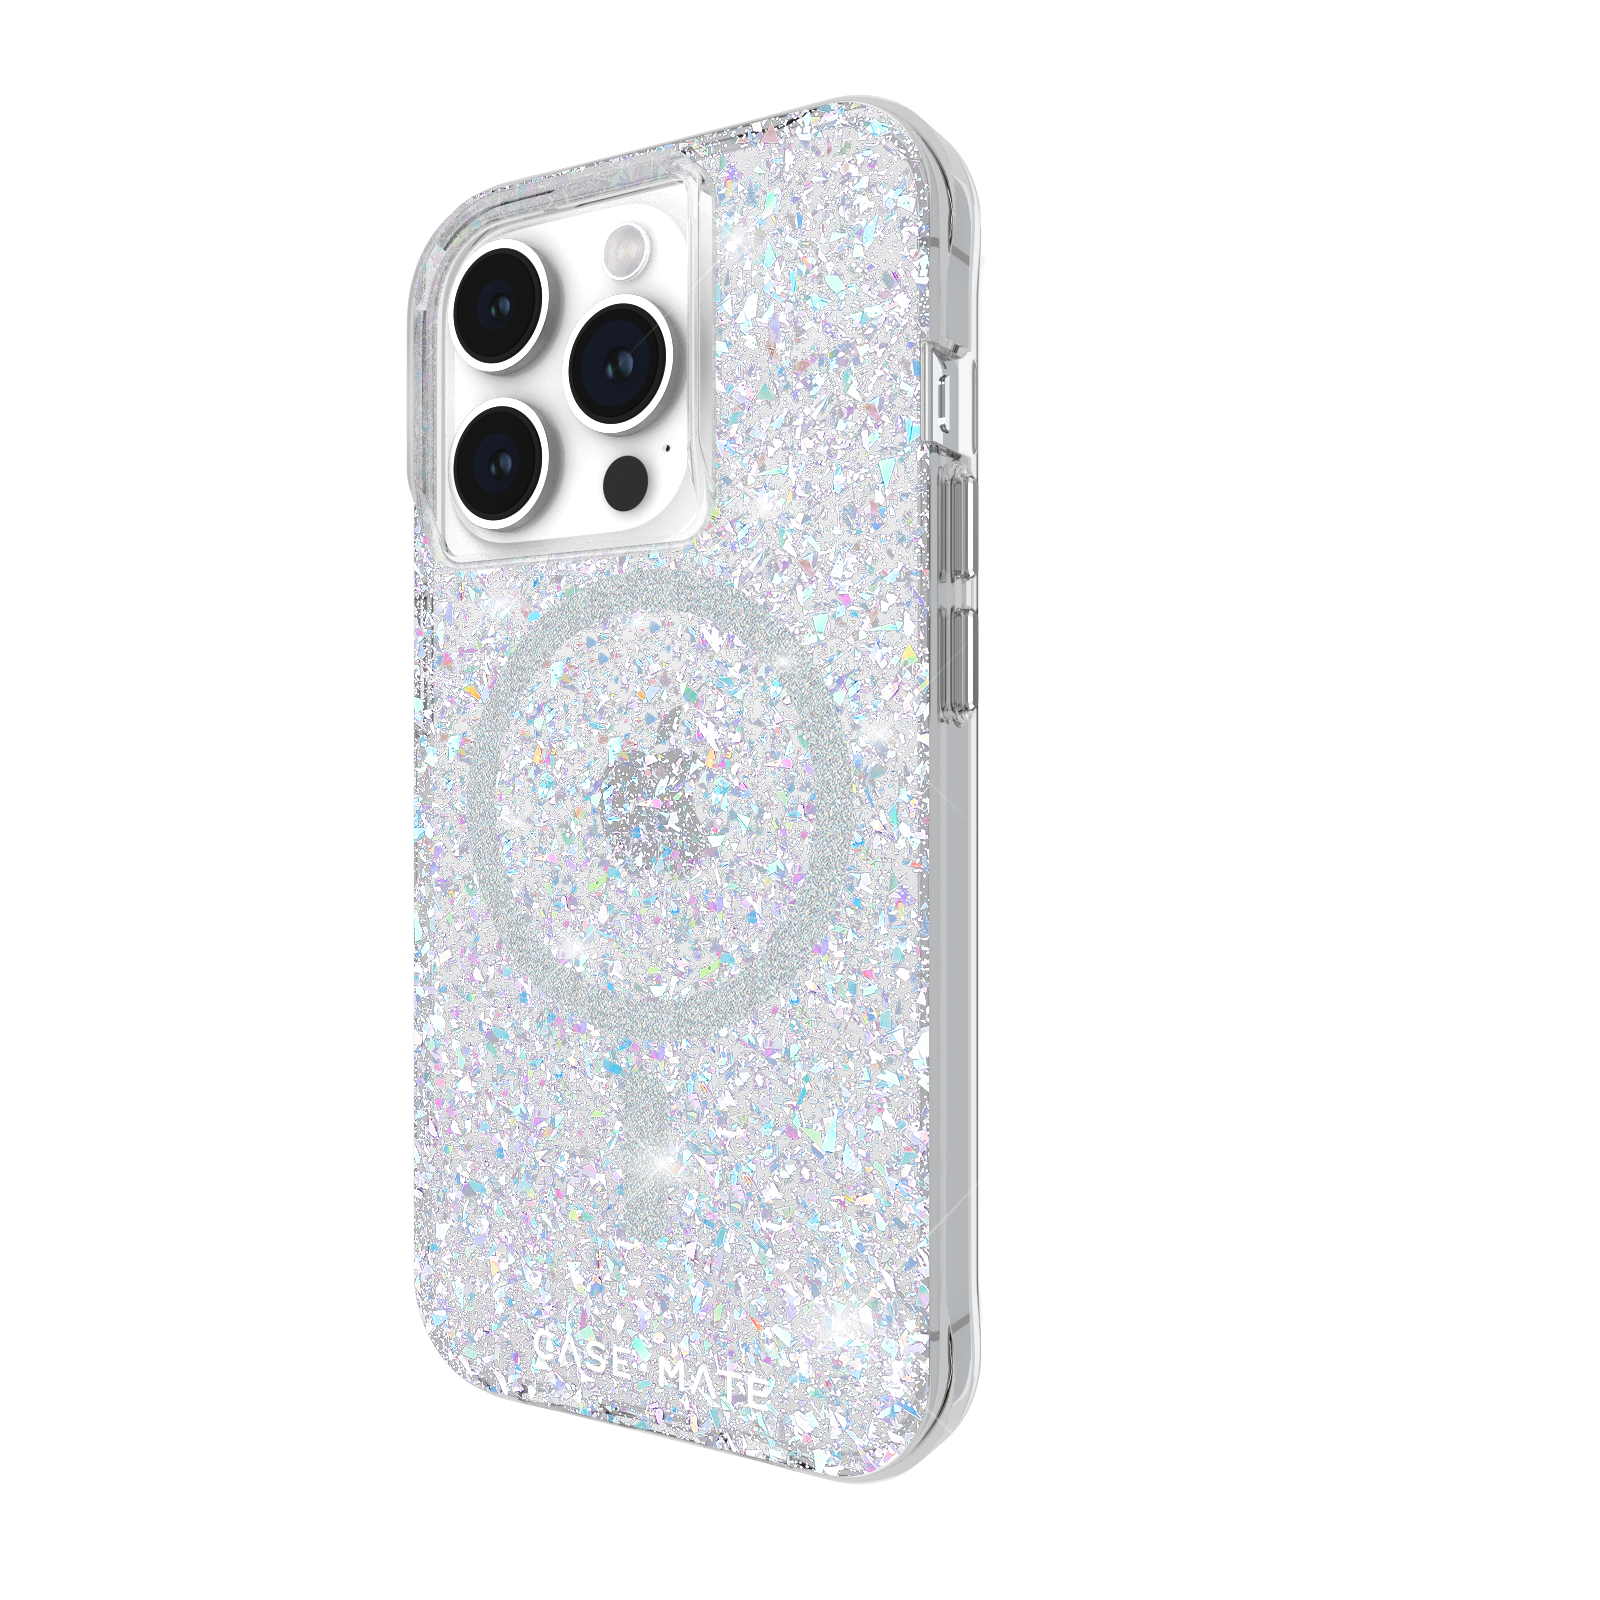 CASE-MATE Pro, 15 Backcover, Twinkle, Glitzer Apple, iPhone